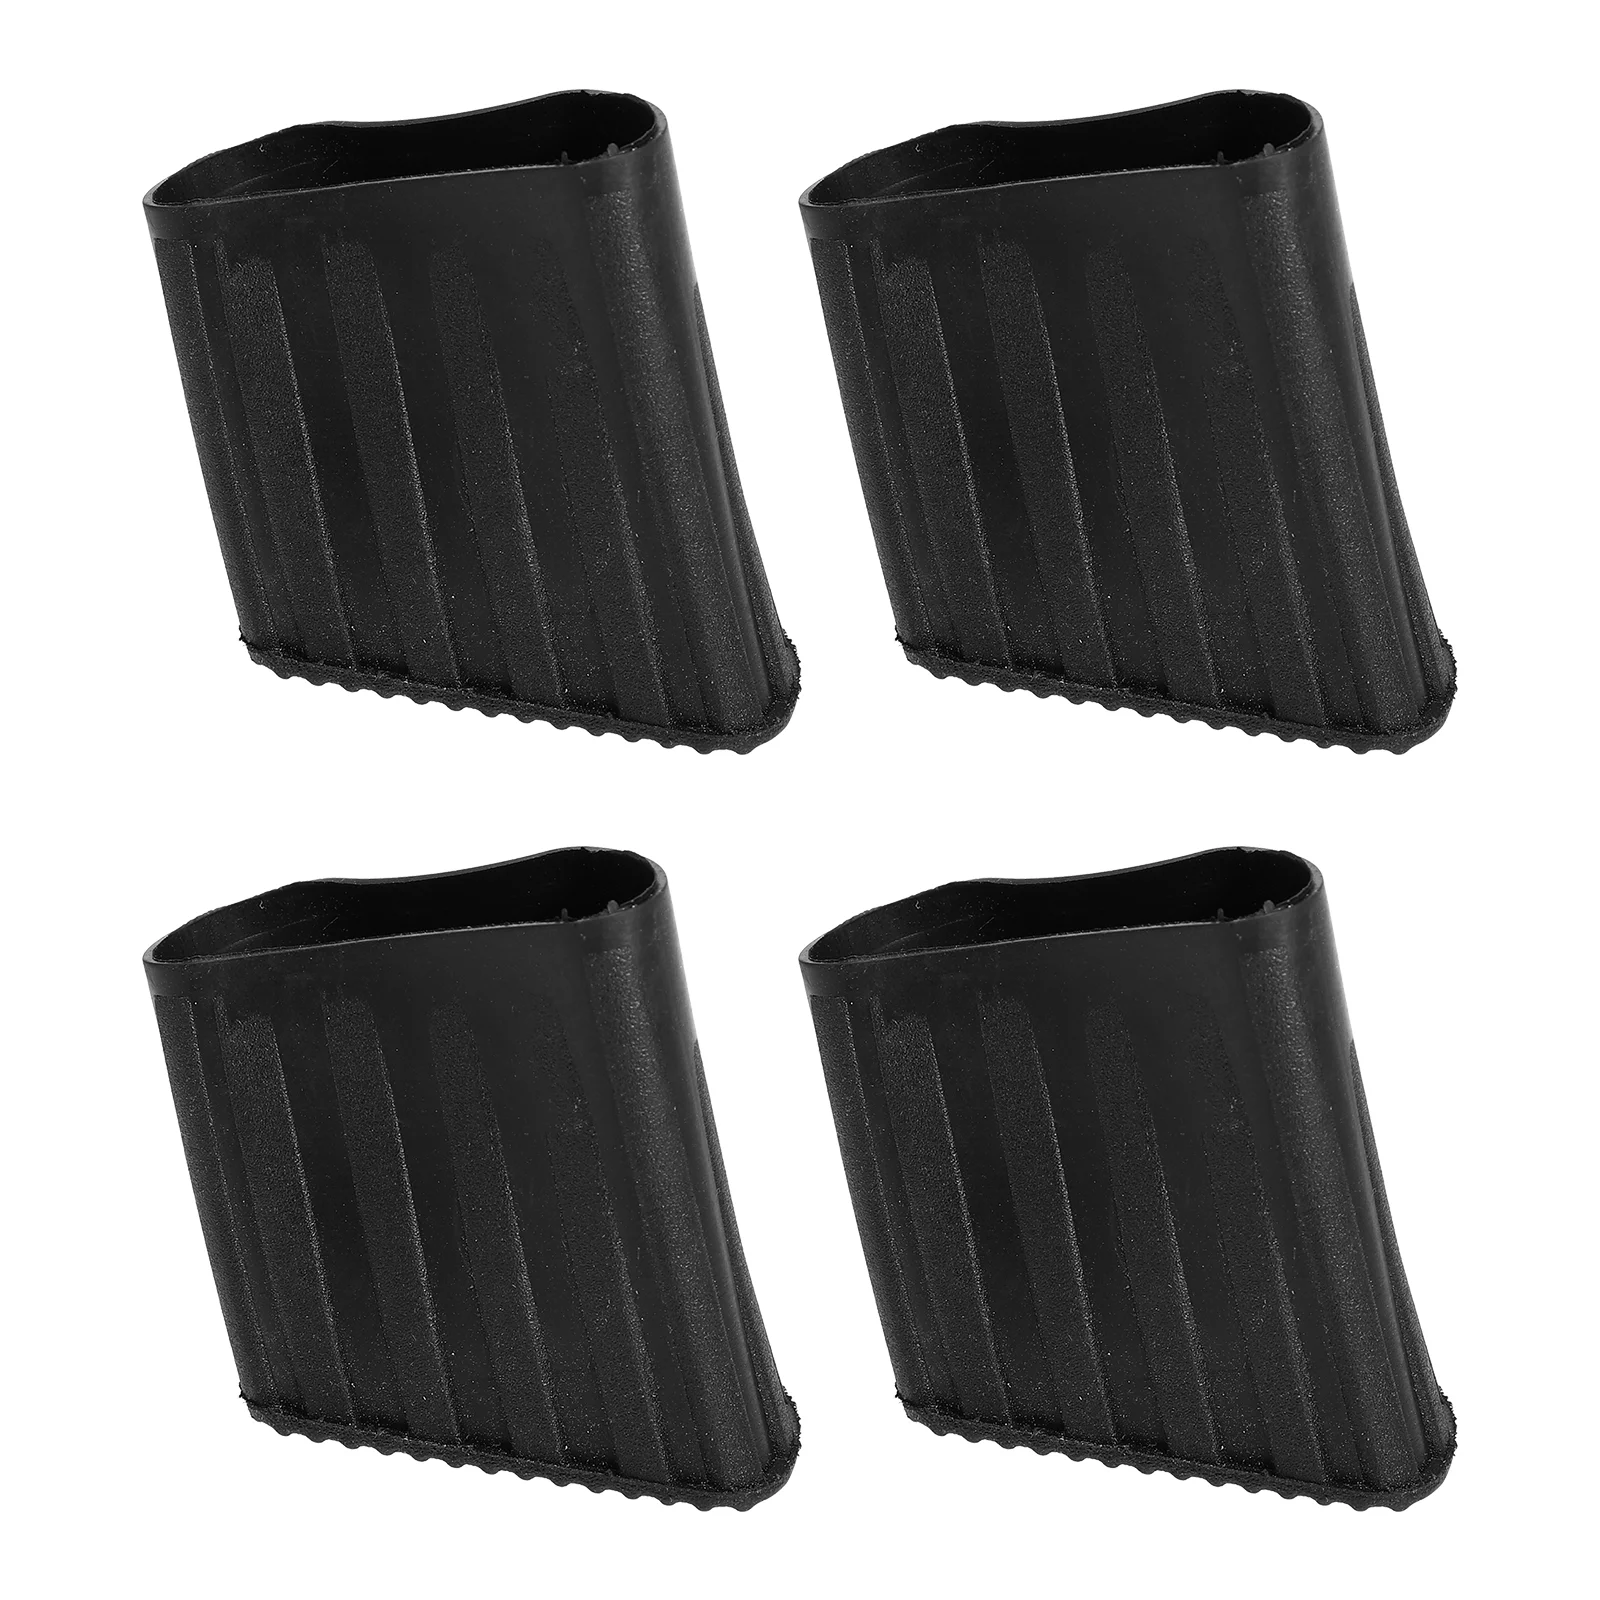 

Ladder Feet Rubber Covers Pads Stepreplacement Extension Foot Non Mat Leg Caps Cover Parts Protector Furniturepad Accessories